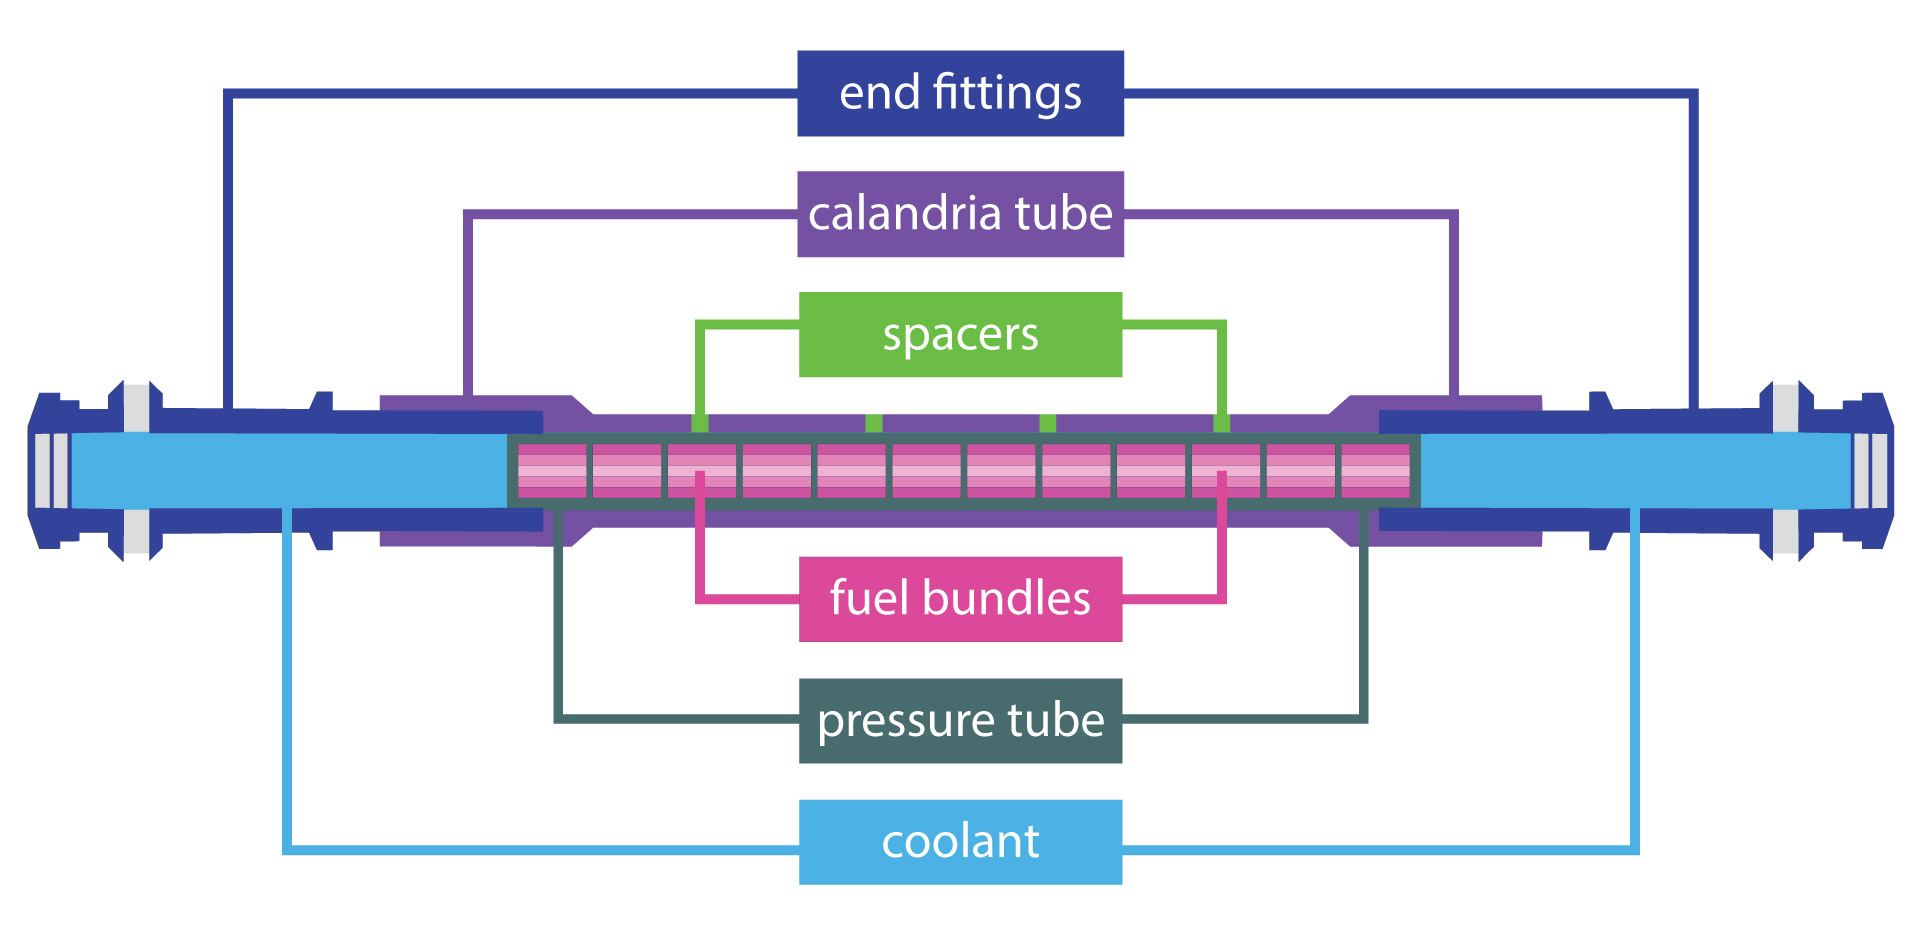 Inside each of CANDU nuclear power reactors in Canada are several hundred fuel channels. There are various parts that make up the fuel channel. On the two opposite ends of the pressure tube are end fittings. Inside the pressure tube are the fuel bundles, which generate heat and coolant. On the outside of the pressure tube there is the calandria tube separated from the pressure tube by multiple spacers.